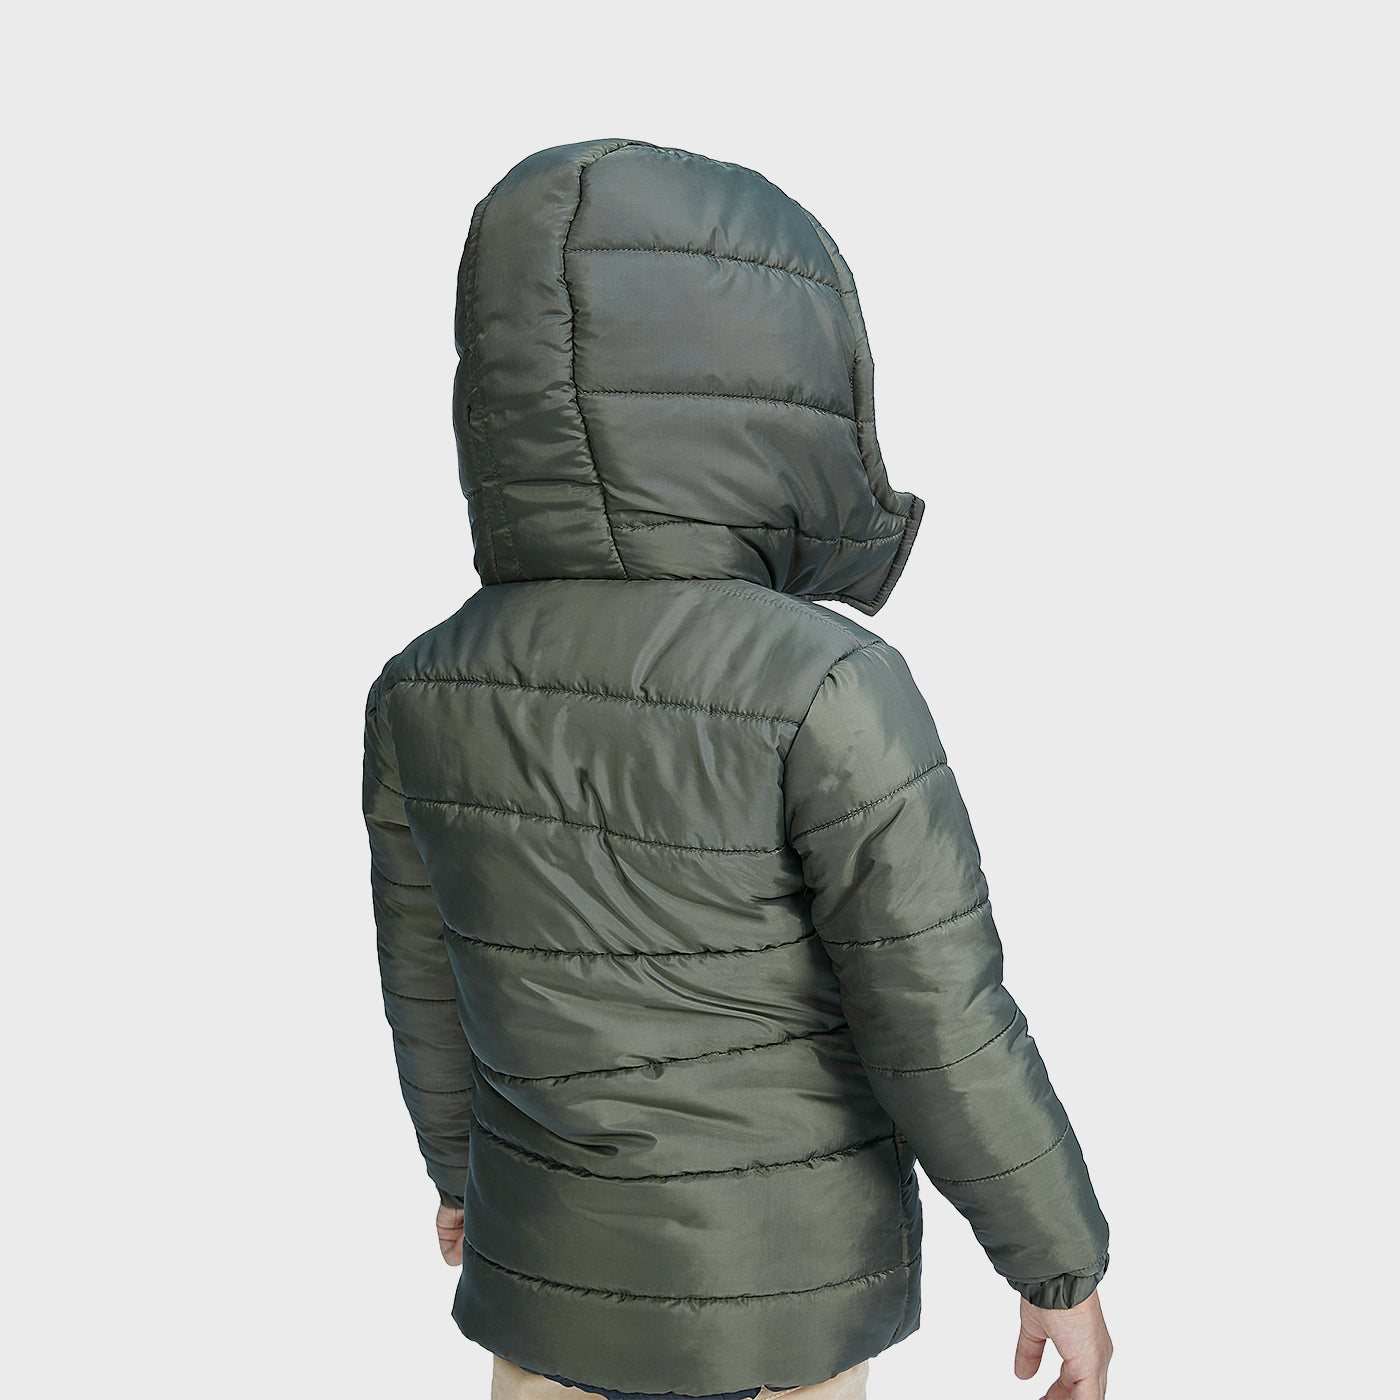 Hooded Puffer Jacket for Boys